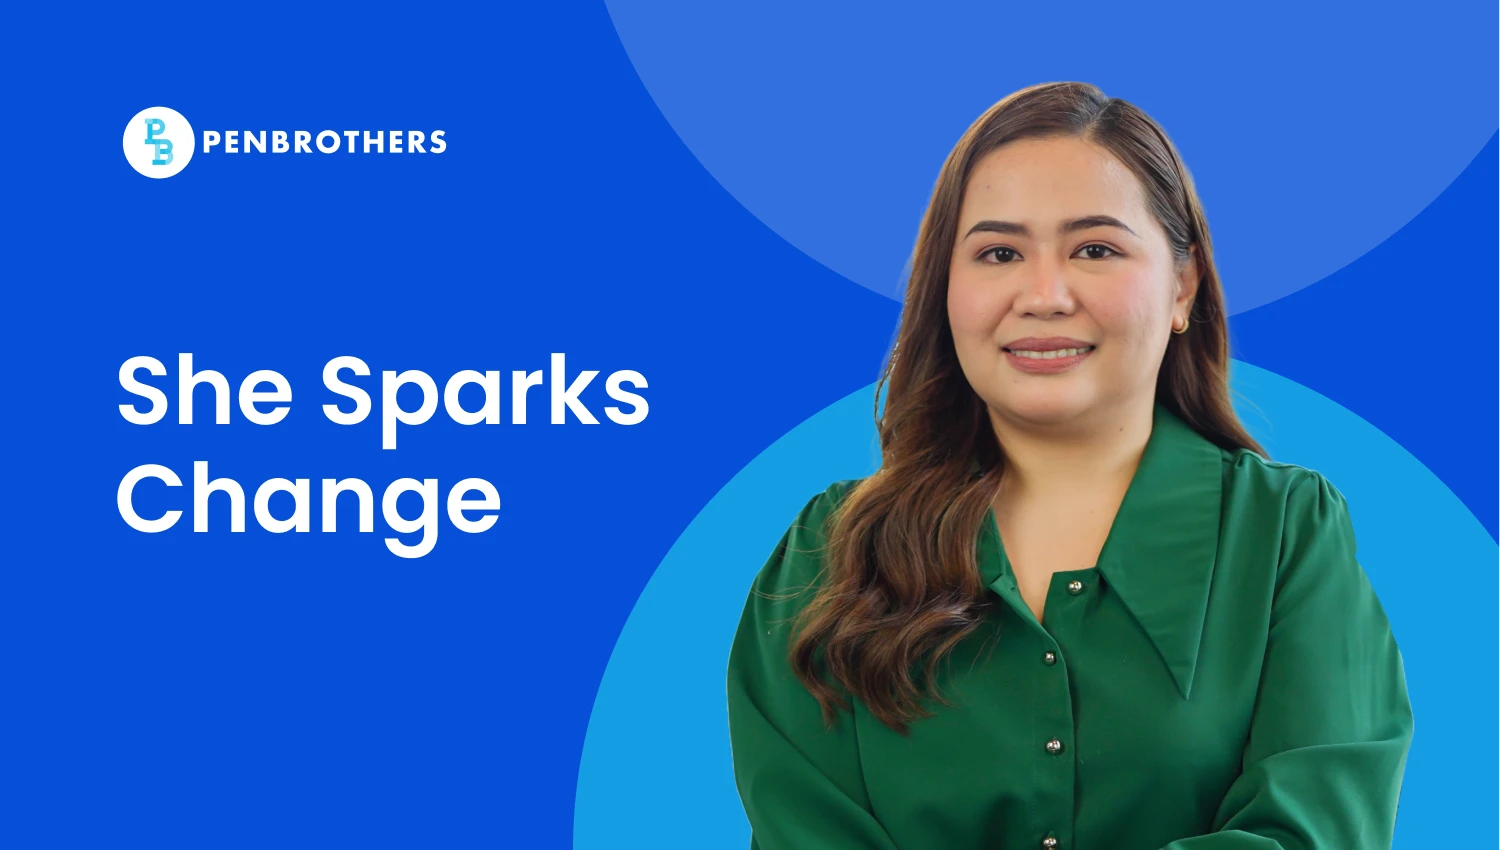 She Sparks Change: An Electrical Engineer Charging Up For Success